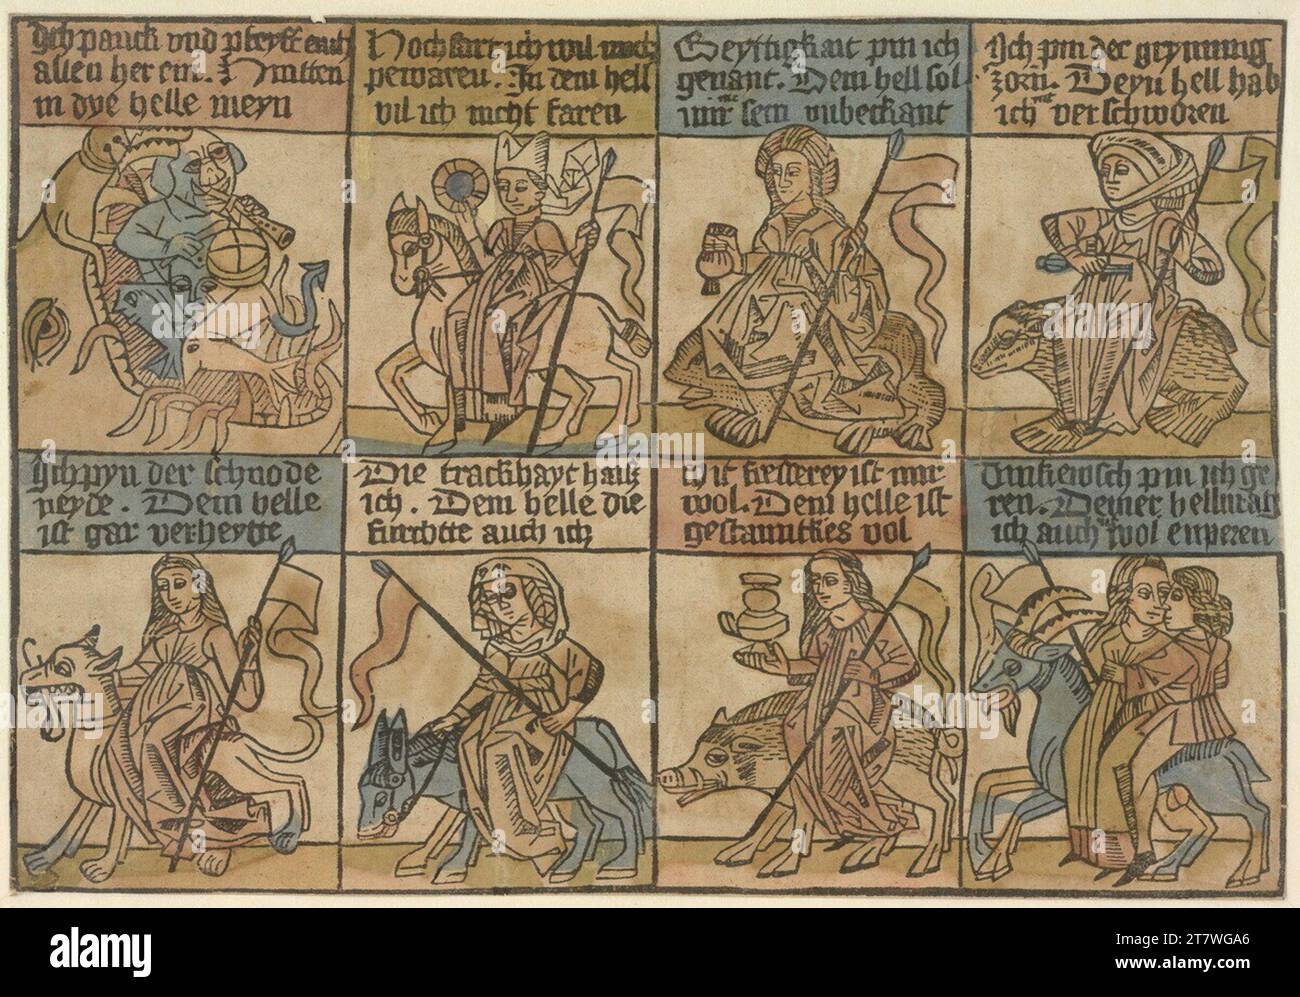 Anonym The seven deadly sins and the devil. Woodcut, colored around 1480-1490 Stock Photo